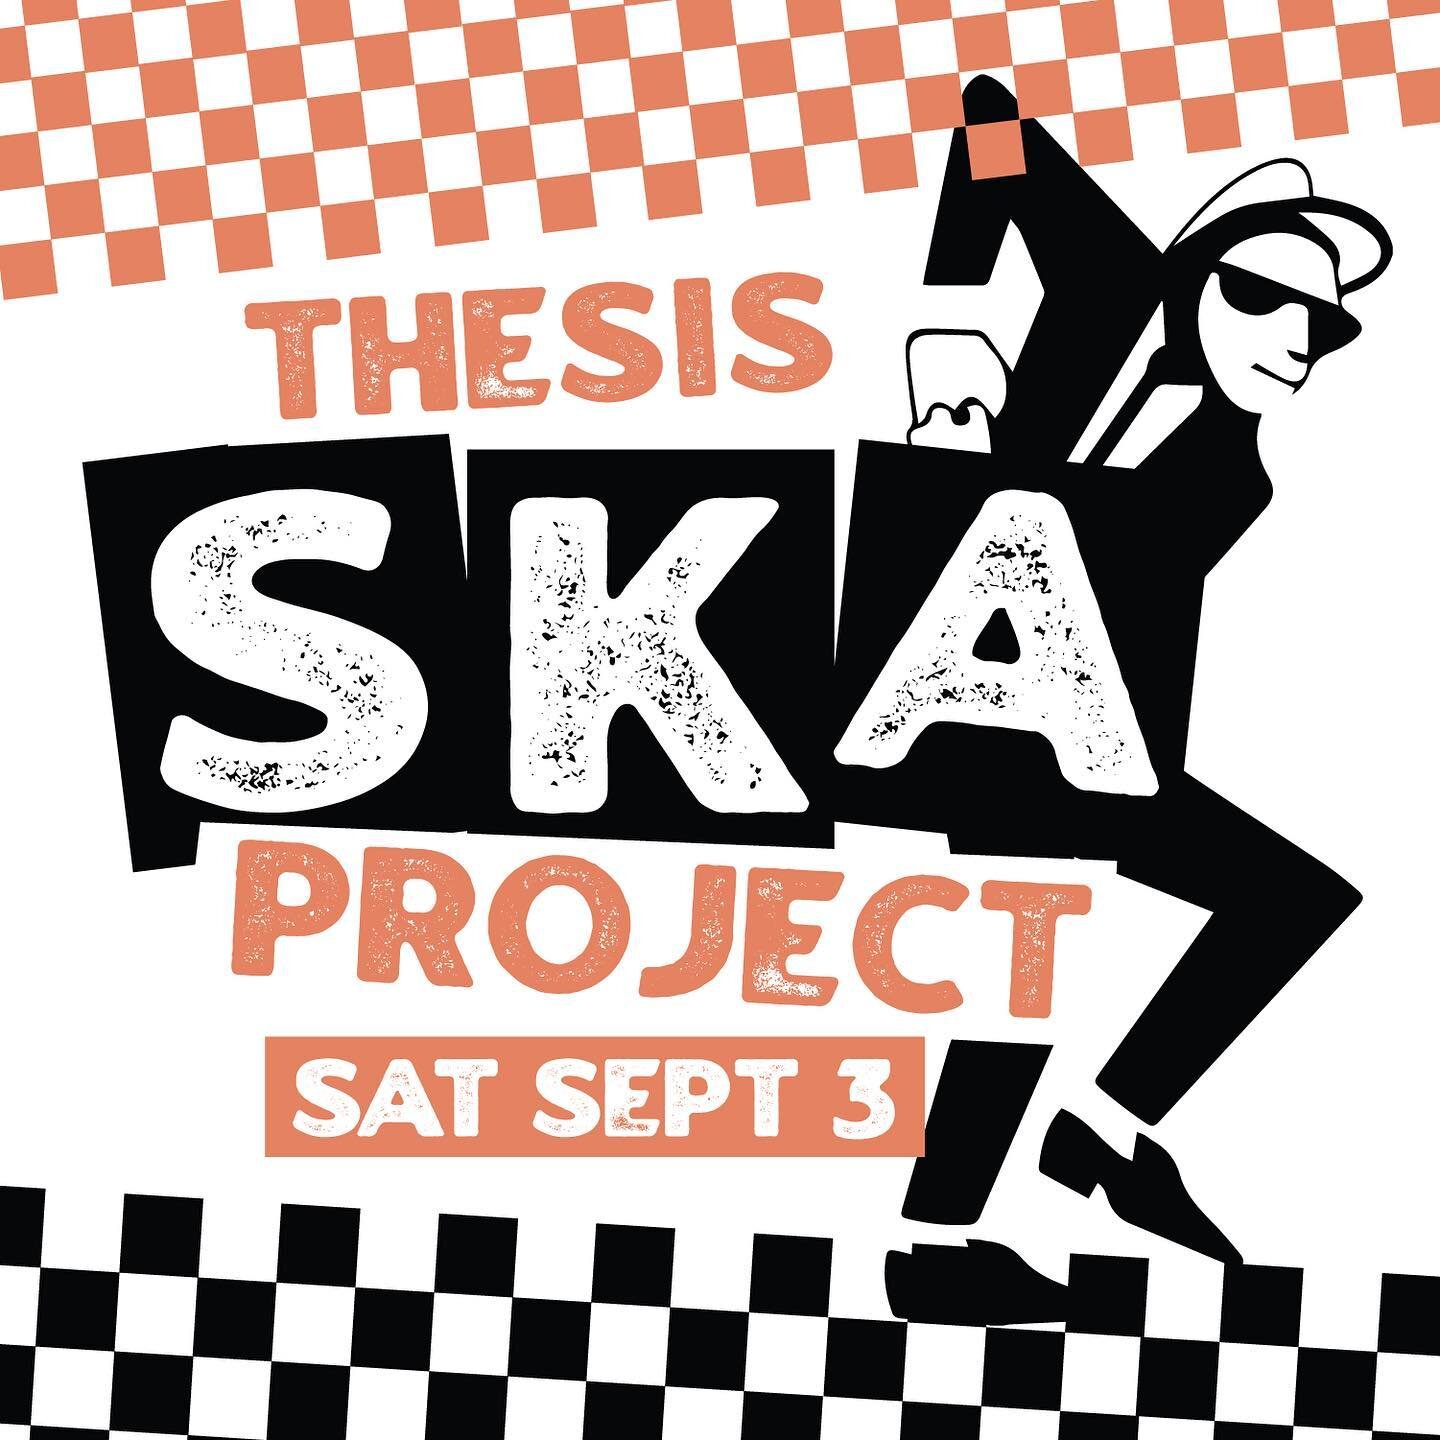 Who is ready for Thesis SKA Project?!? Our friends at @treedomemn have put together one hell of a music lineup compromised of all Midwest SKA bands. There will be horns. There will be dancing. There will be beer. Music will be rocking from 2-11pm. Du